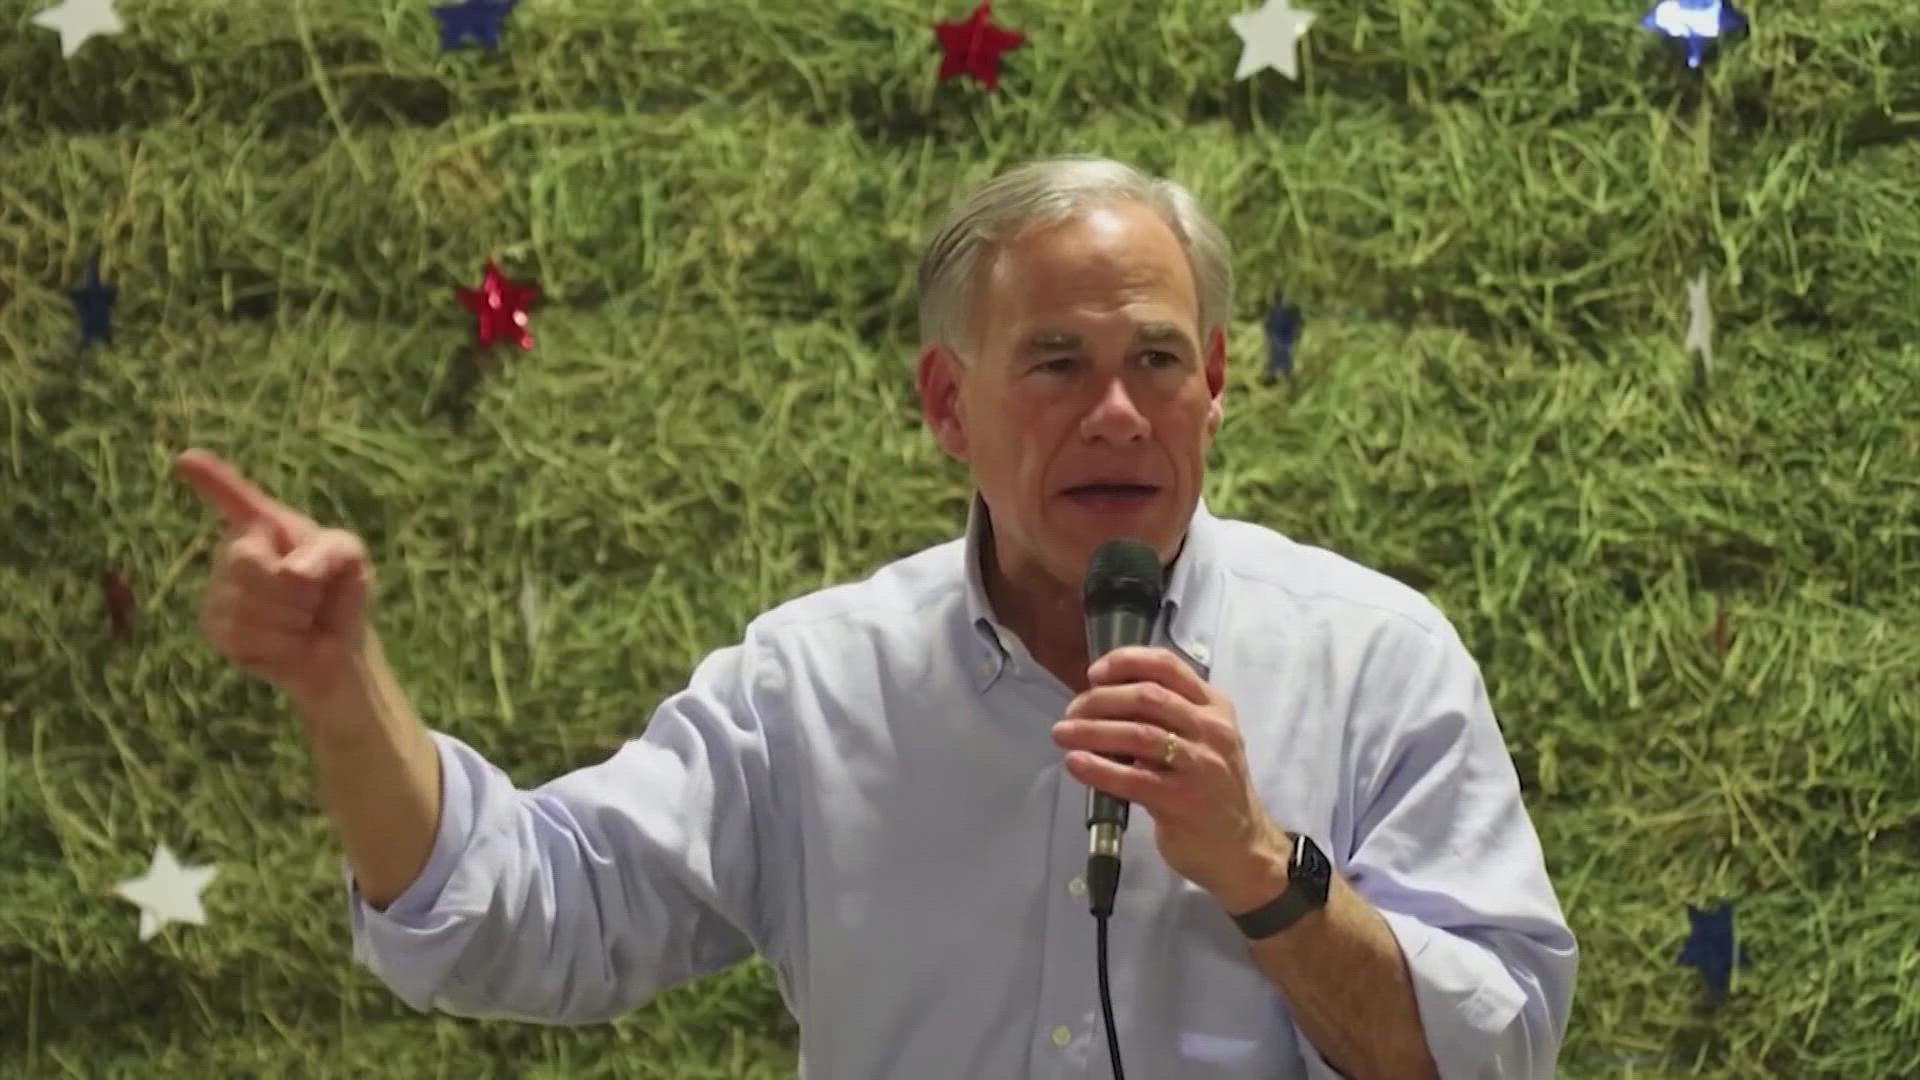 Gov. Greg Abbott is hoping to deliver a victory speech to supporters a few miles from the border signaling a strong push to draw in more Hispanic voters to GOP.